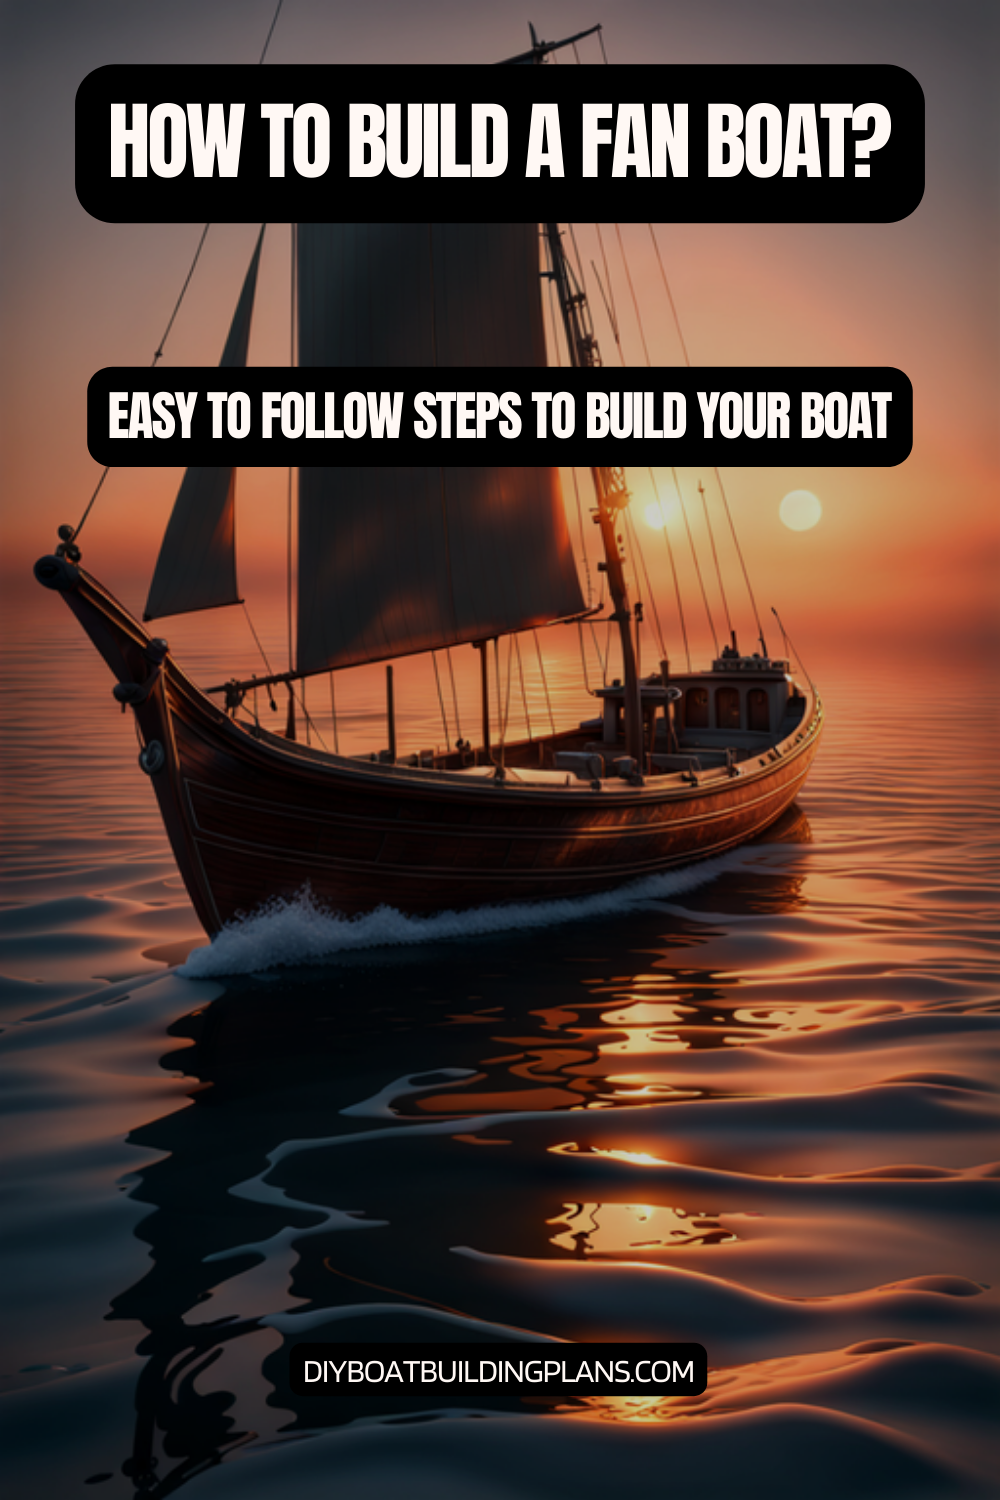 How To Build a Fan Boat